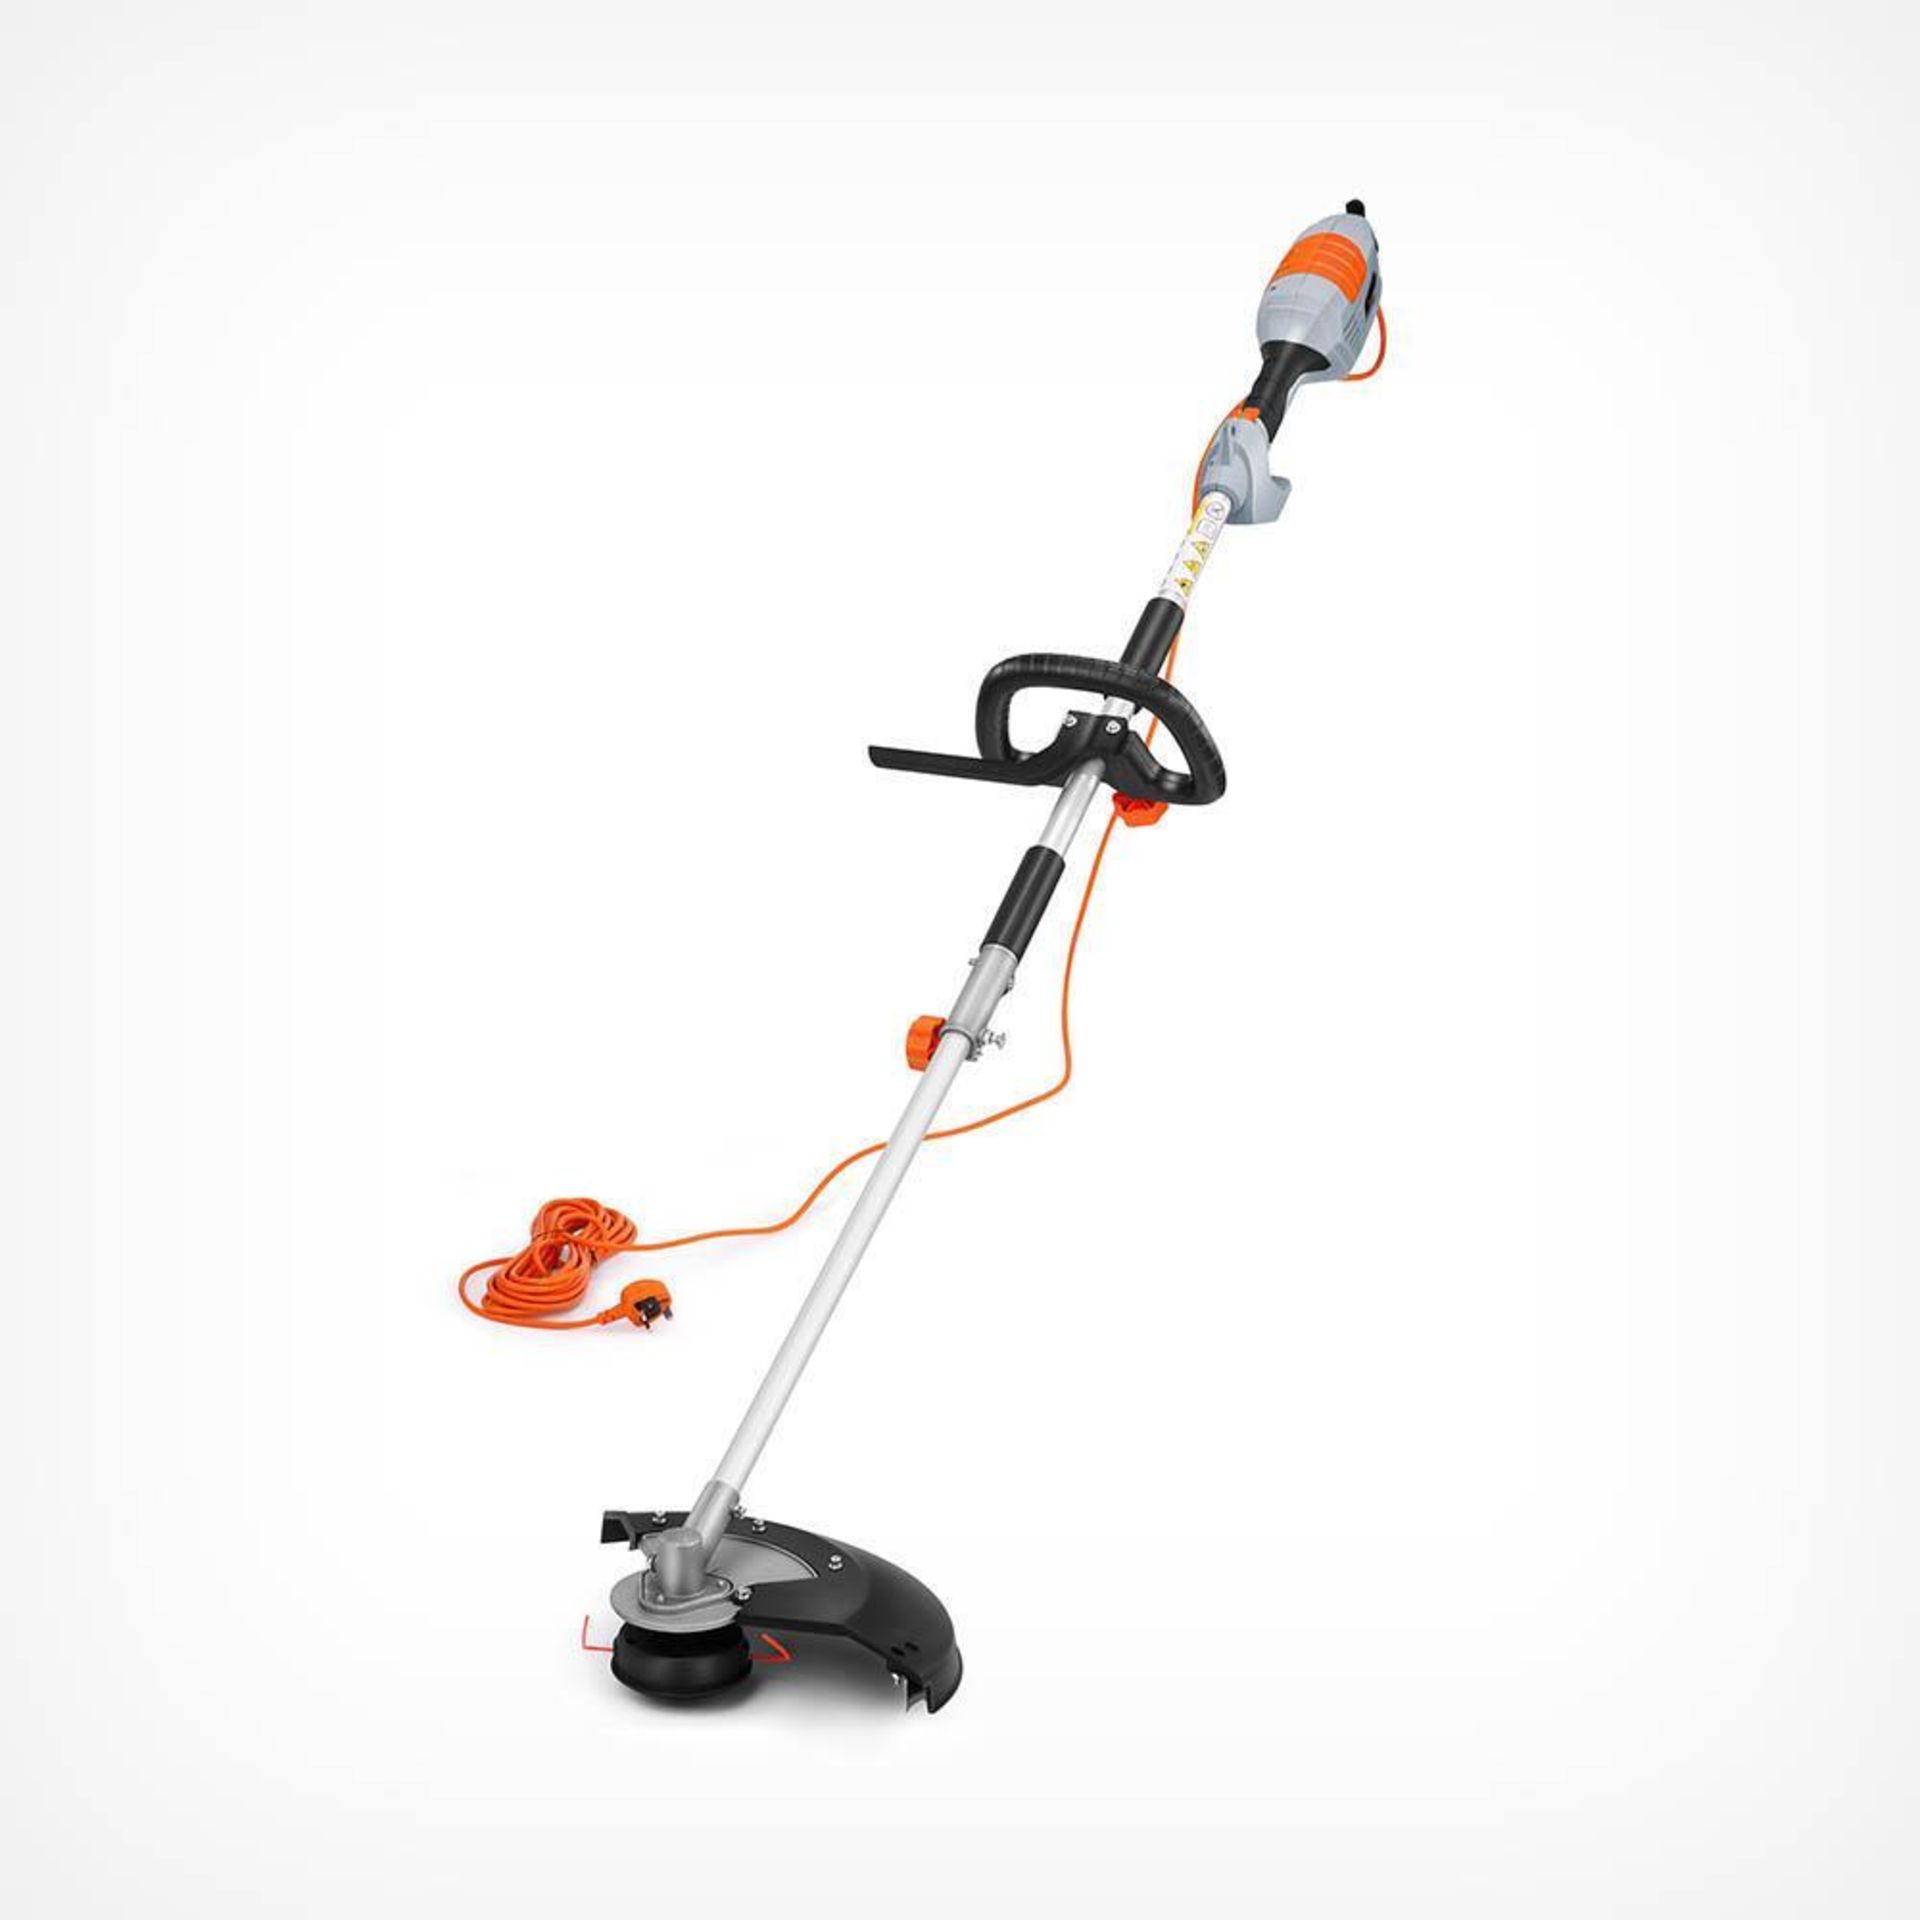 Grass Trimmer Brush Cutter - BI. Transform any overgrown lawn into an attractive, well-manicured